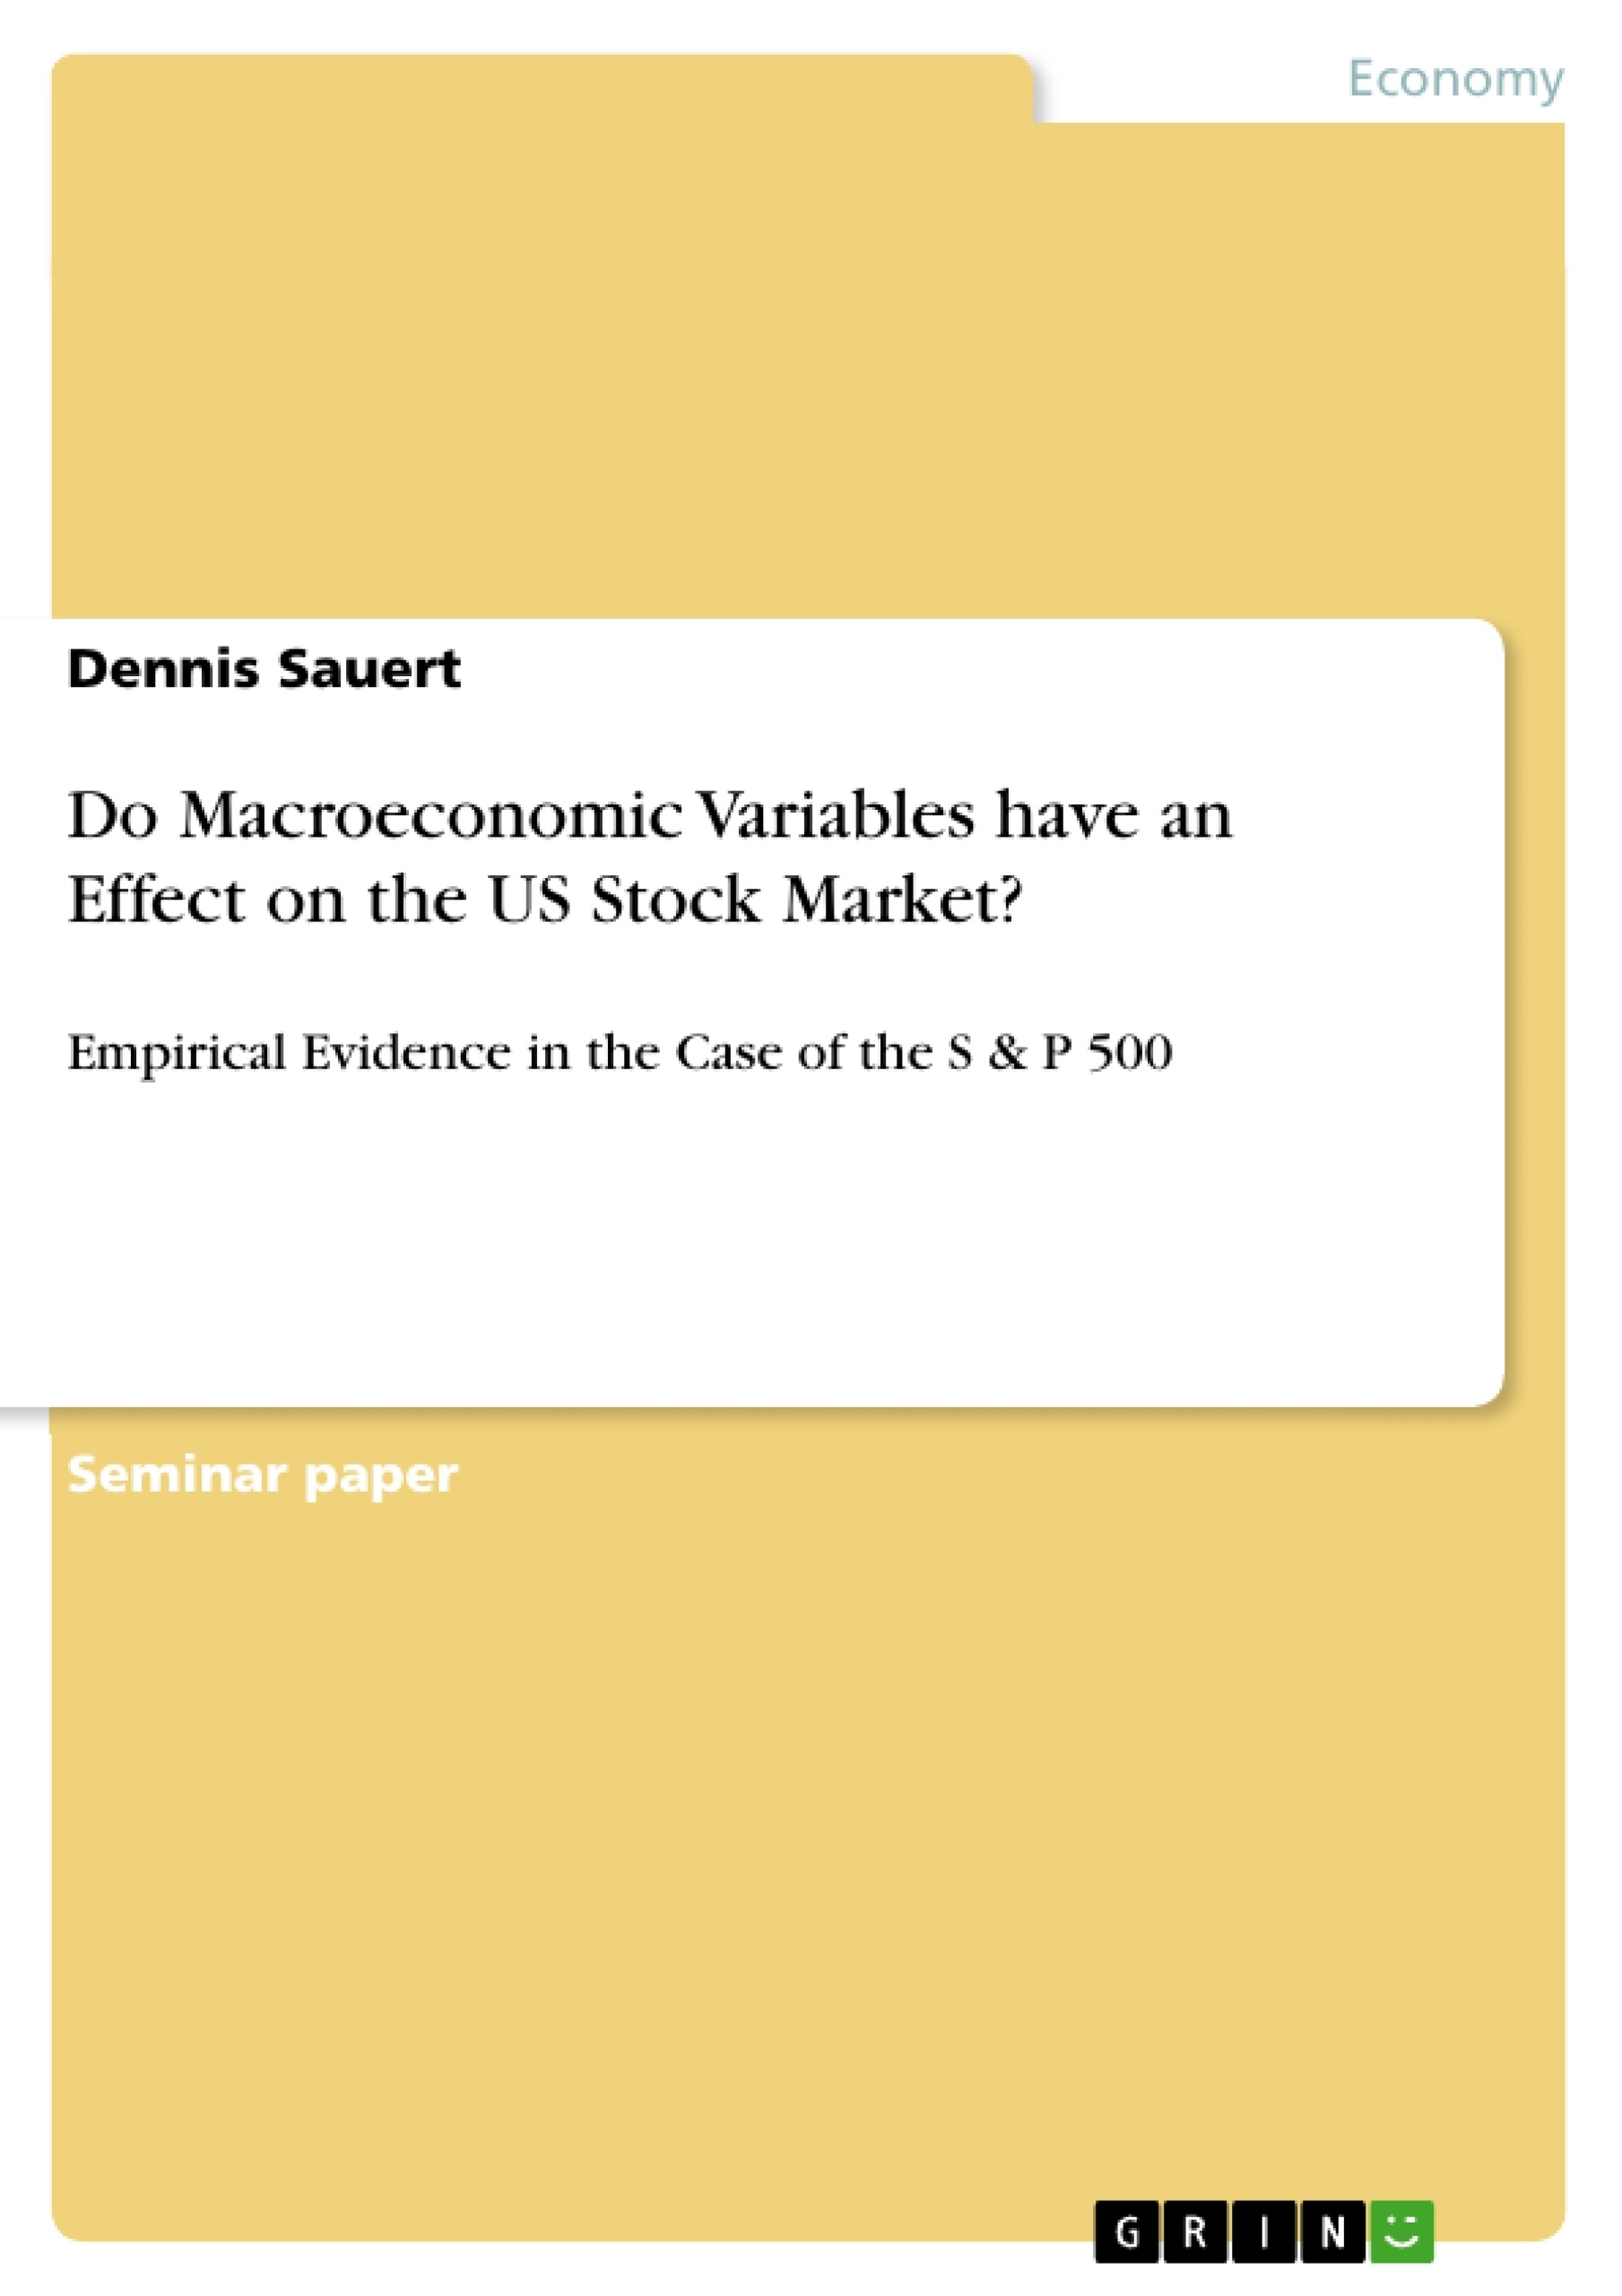 Titre: Do Macroeconomic Variables have an Effect on the US Stock Market?